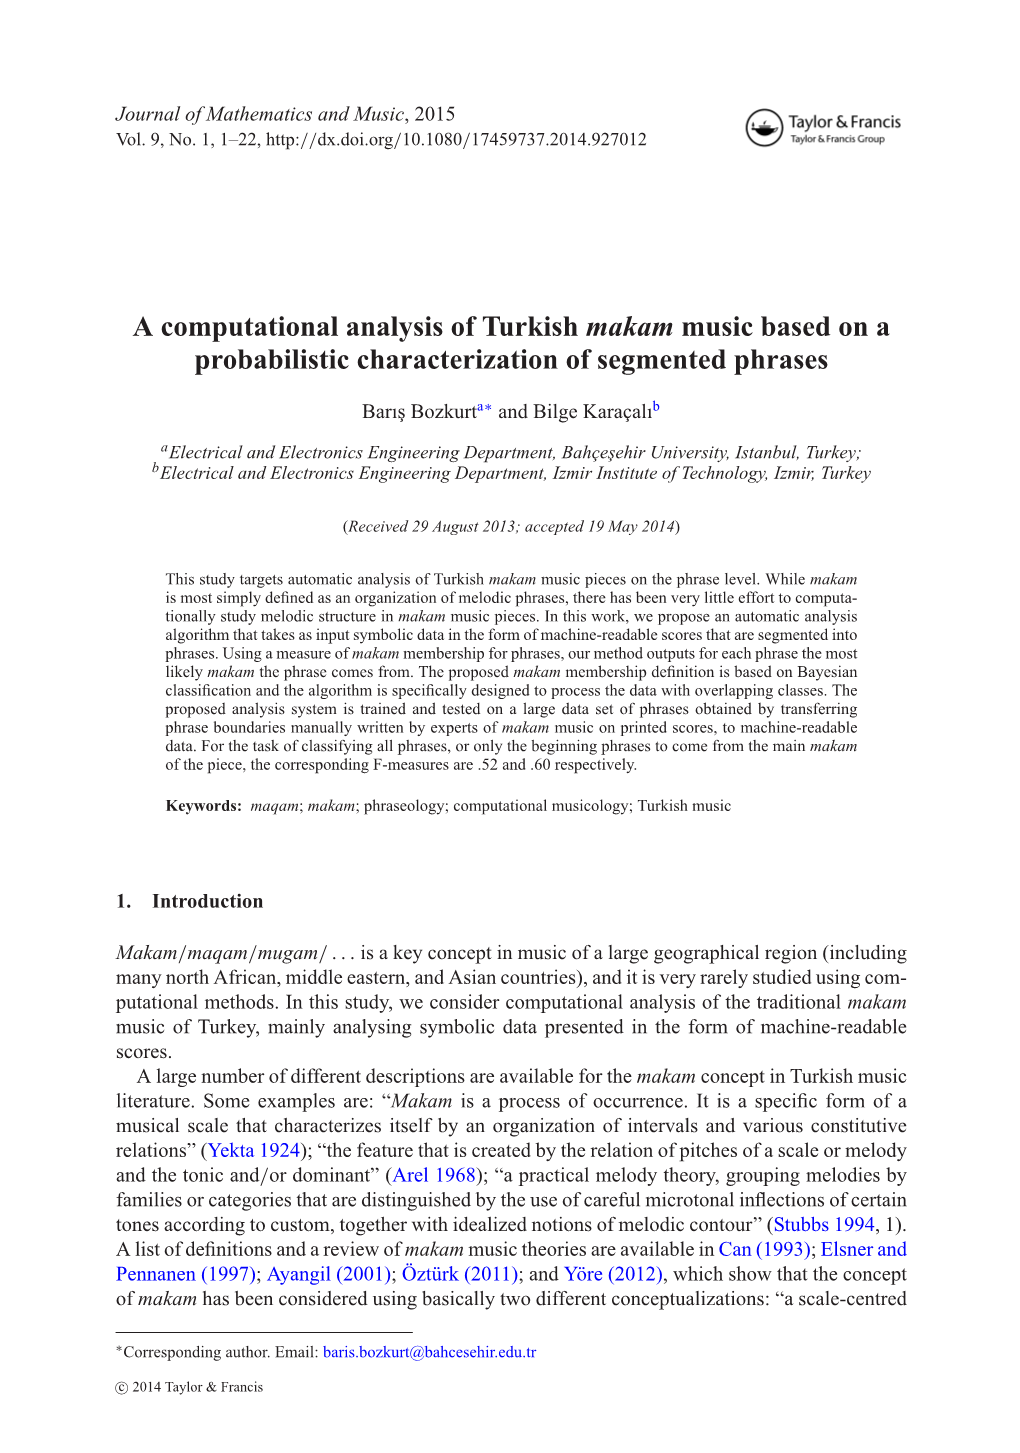 A Computational Analysis of Turkish Makam Music Based on a Probabilistic Characterization of Segmented Phrases